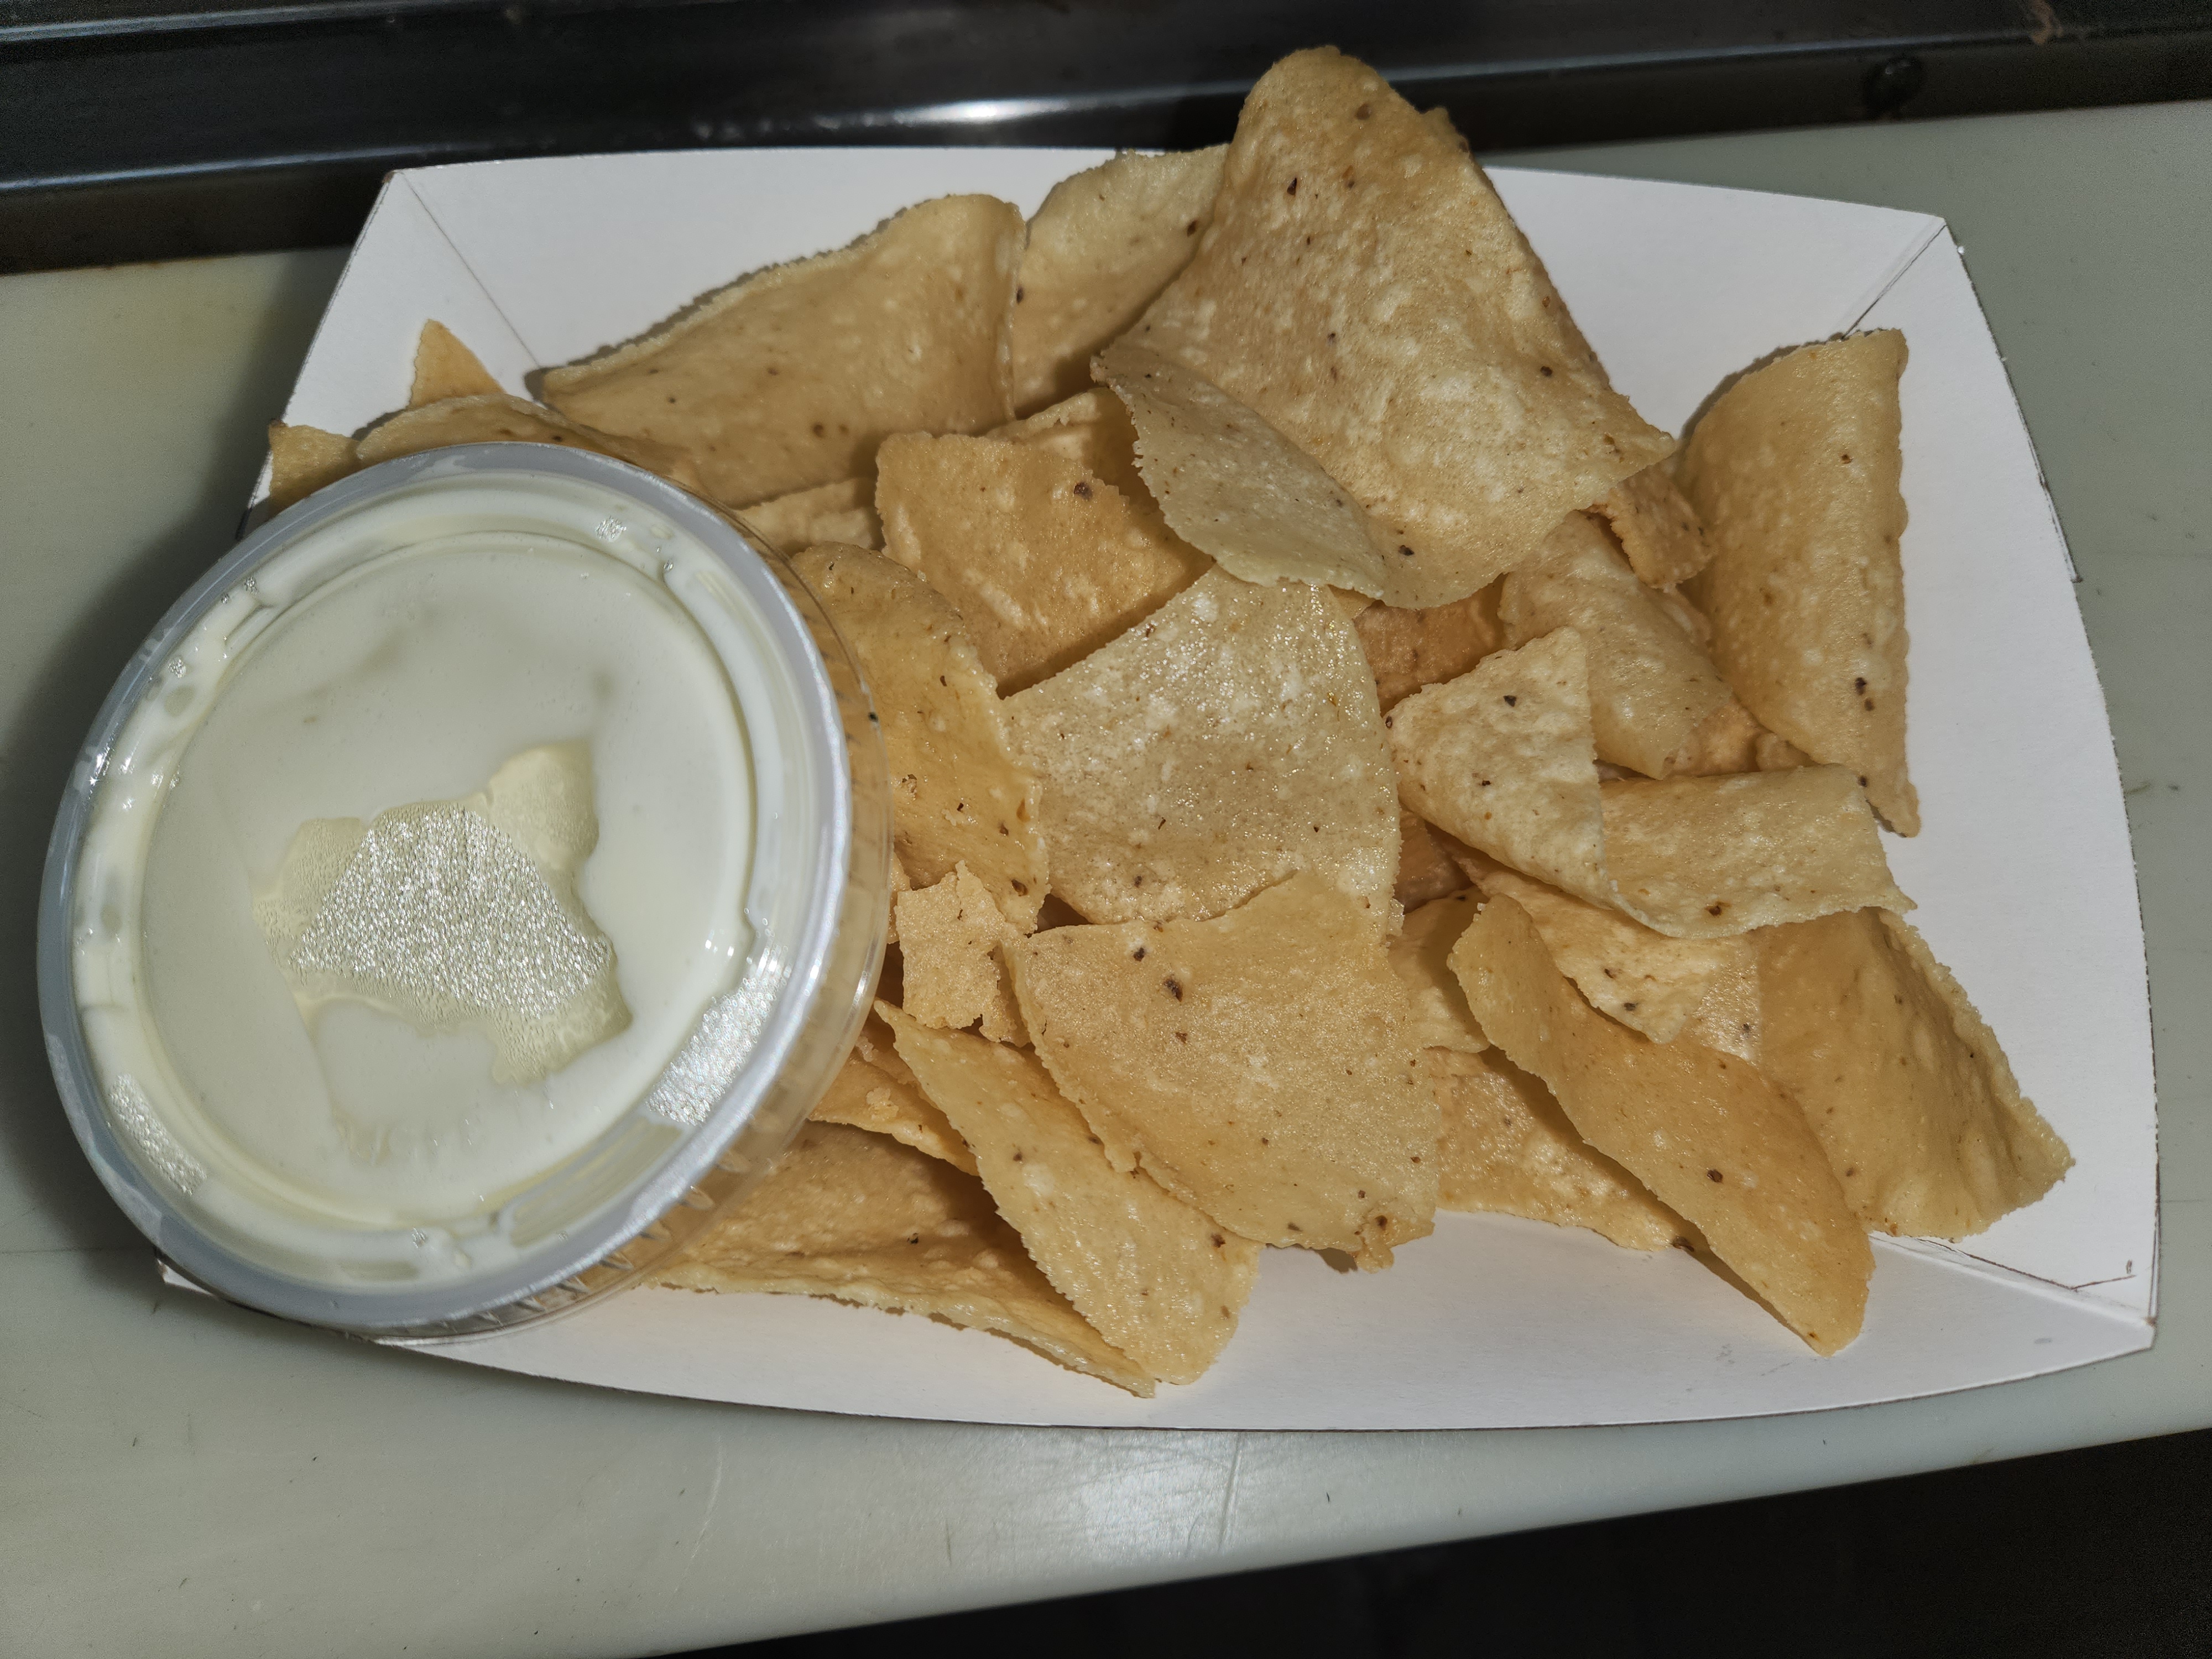 Cheese dip and chips